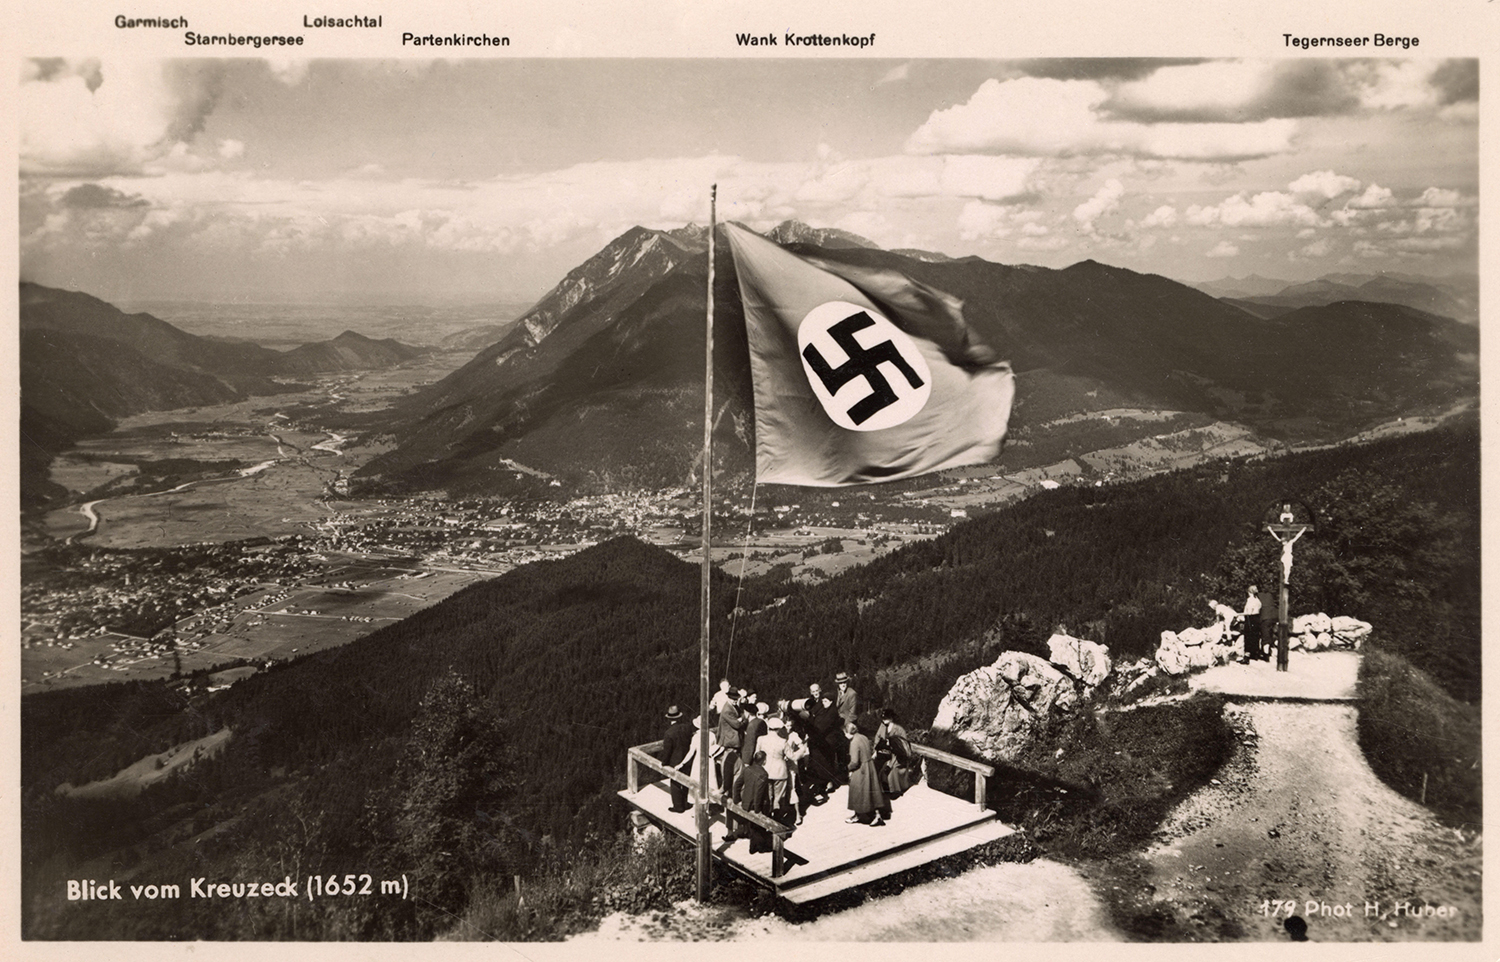 View from the Wetterstein mountain range in Bavaria, mid 1930s.